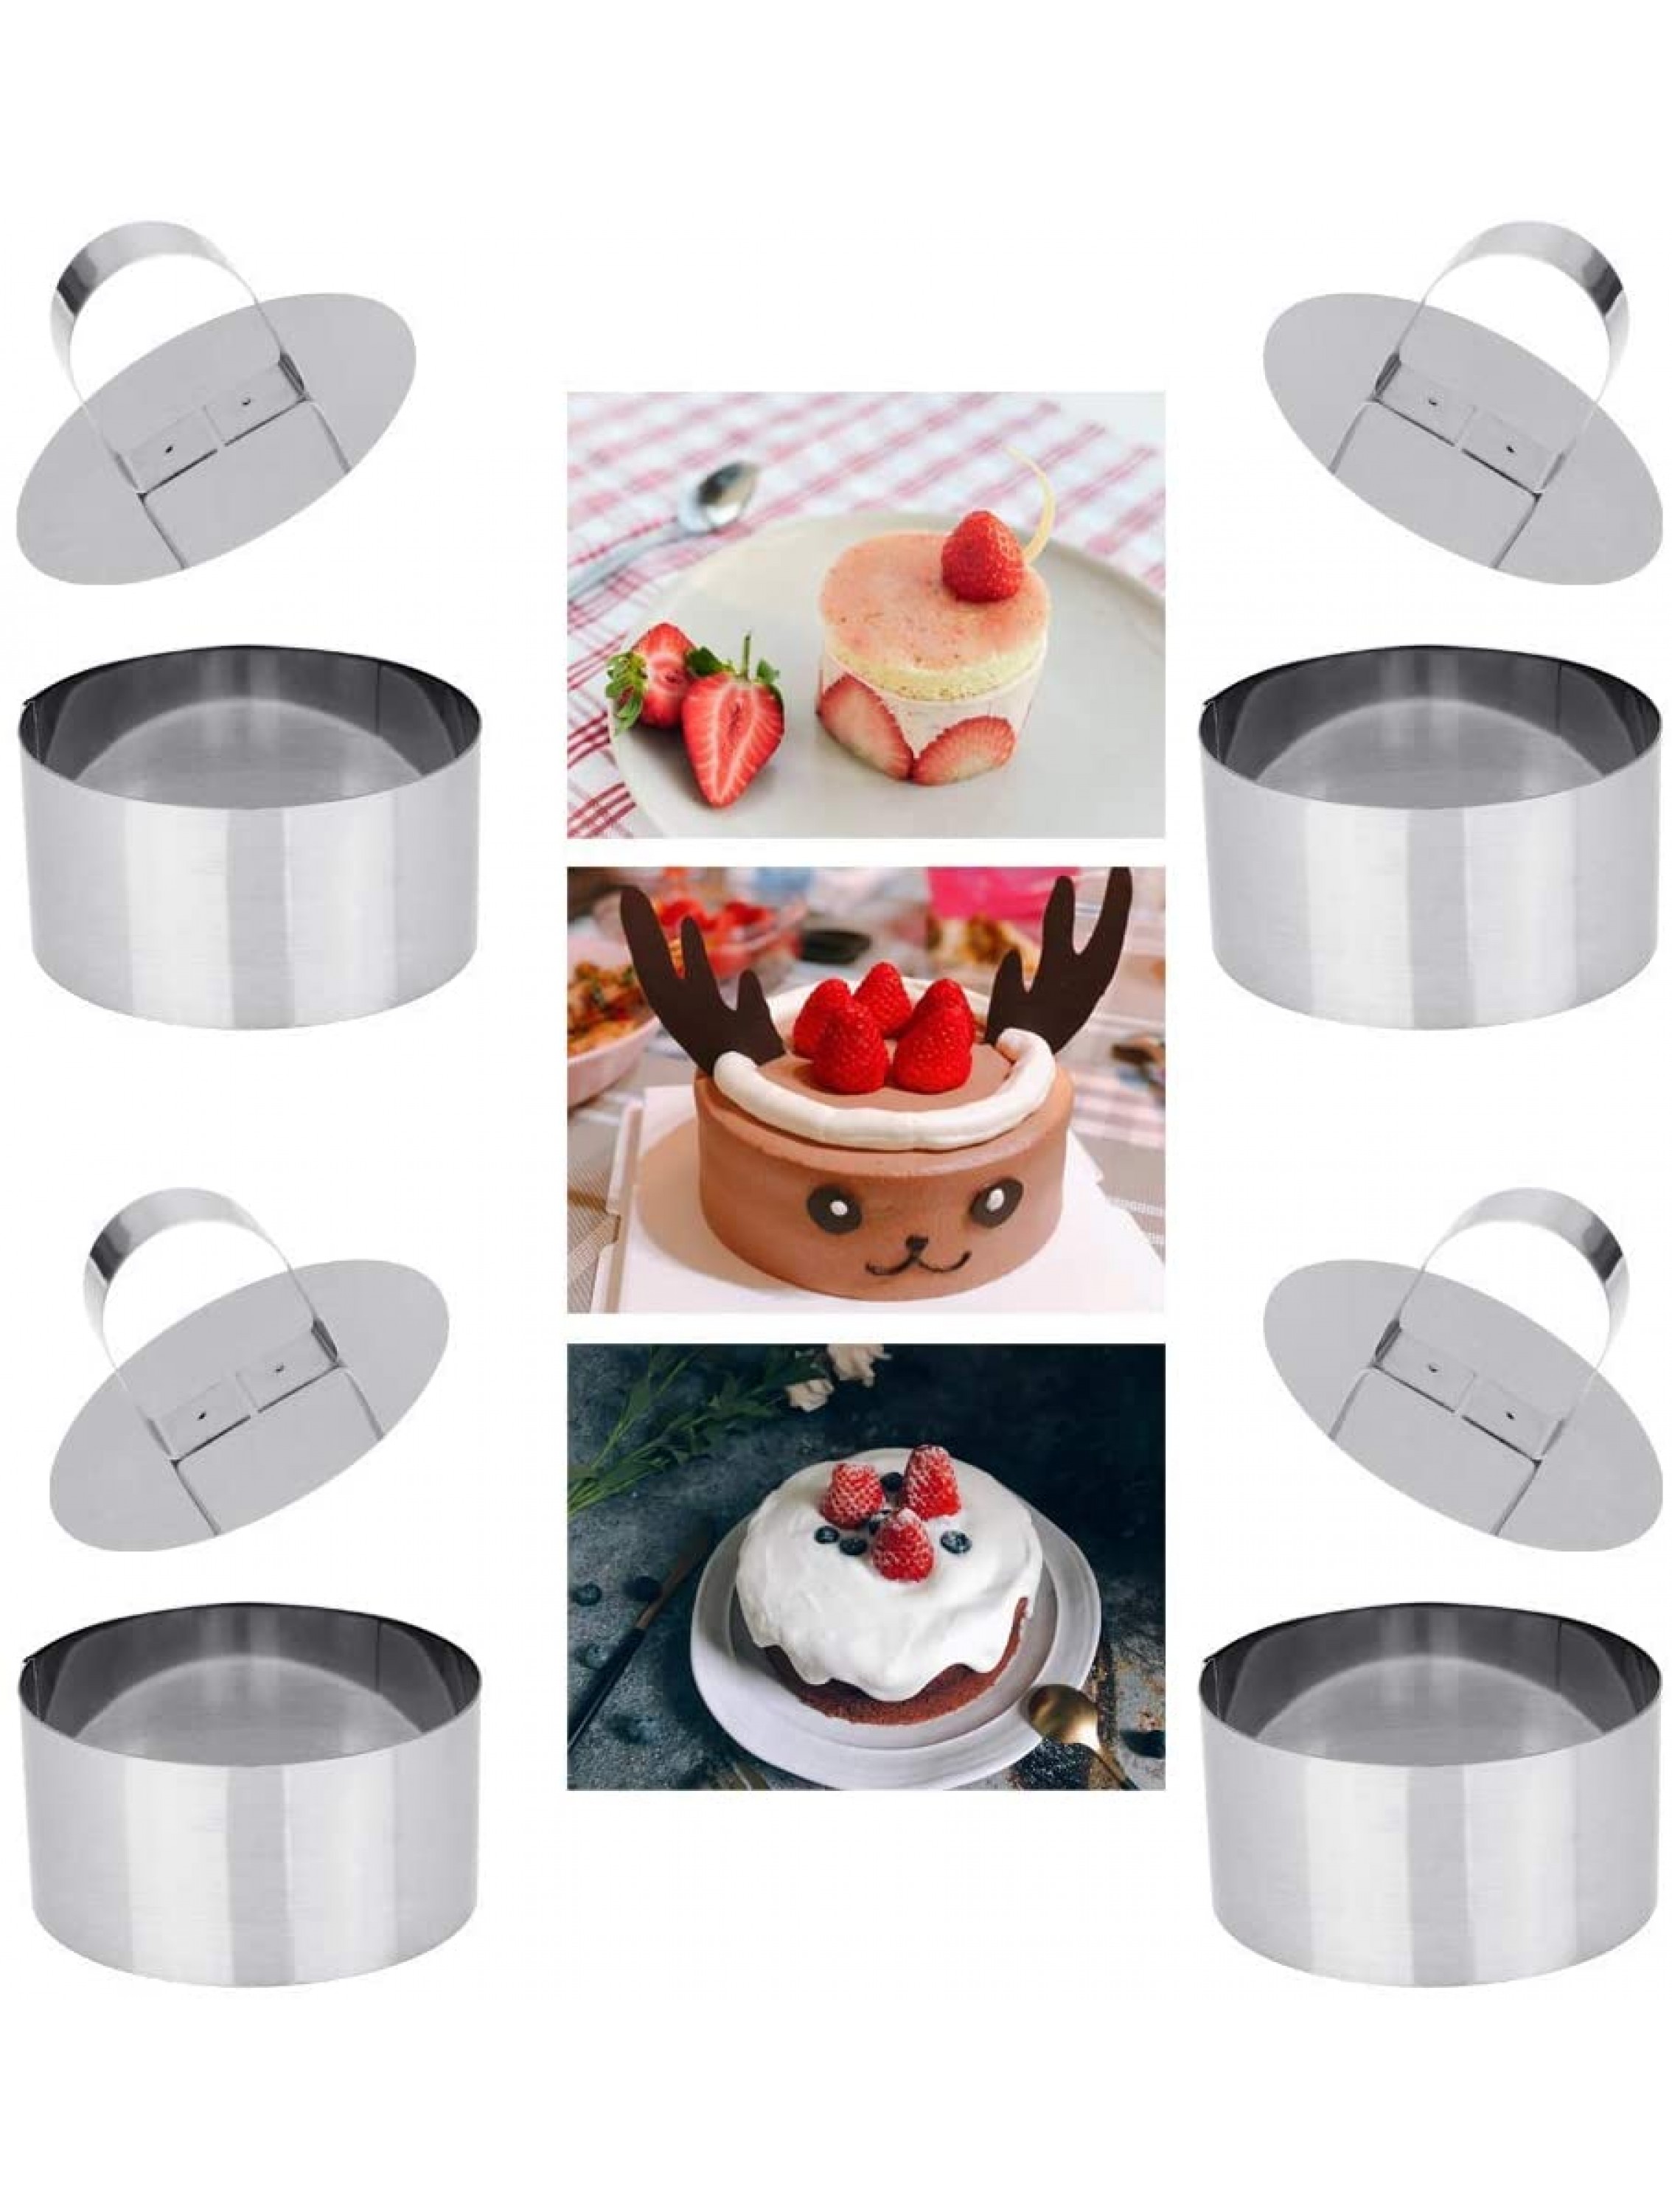 DECARETA 4 PCS Cake Rings Stainless Steel Cake Molds Mousse Round Pastry Rings with Pusher for Baking Cooking Pancake Biscuits Sandwich,Circle size 8 * 8 * 4cm 3.1 * 3.1 * 1.6inch - BHXSYZ0EQ